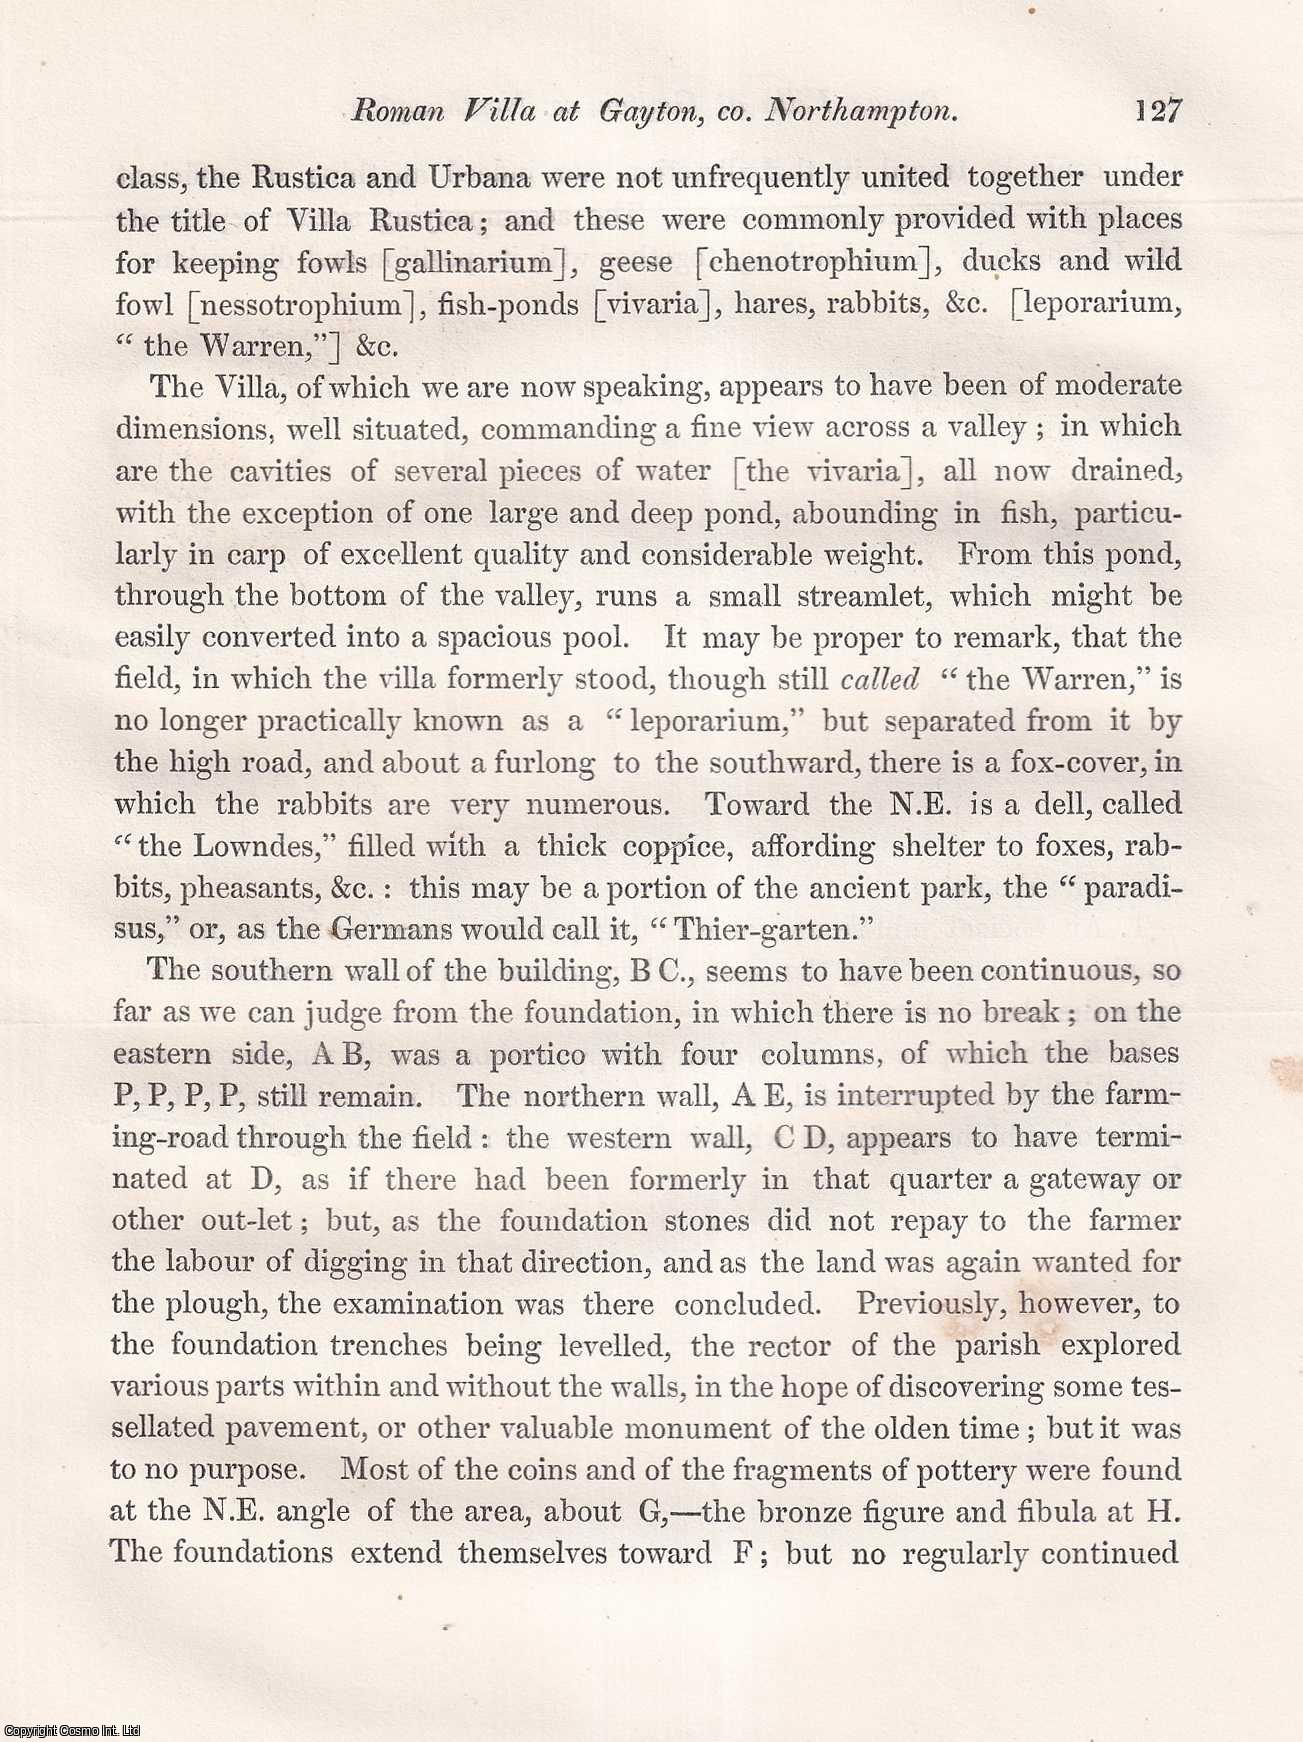 George Butler. - 1844. Account of the Traces of a Roman Villa Discovered, A.D. 1840, at Gayton, near Northamptonshire. An uncommon original article from the journal Archaeologia, 1844.